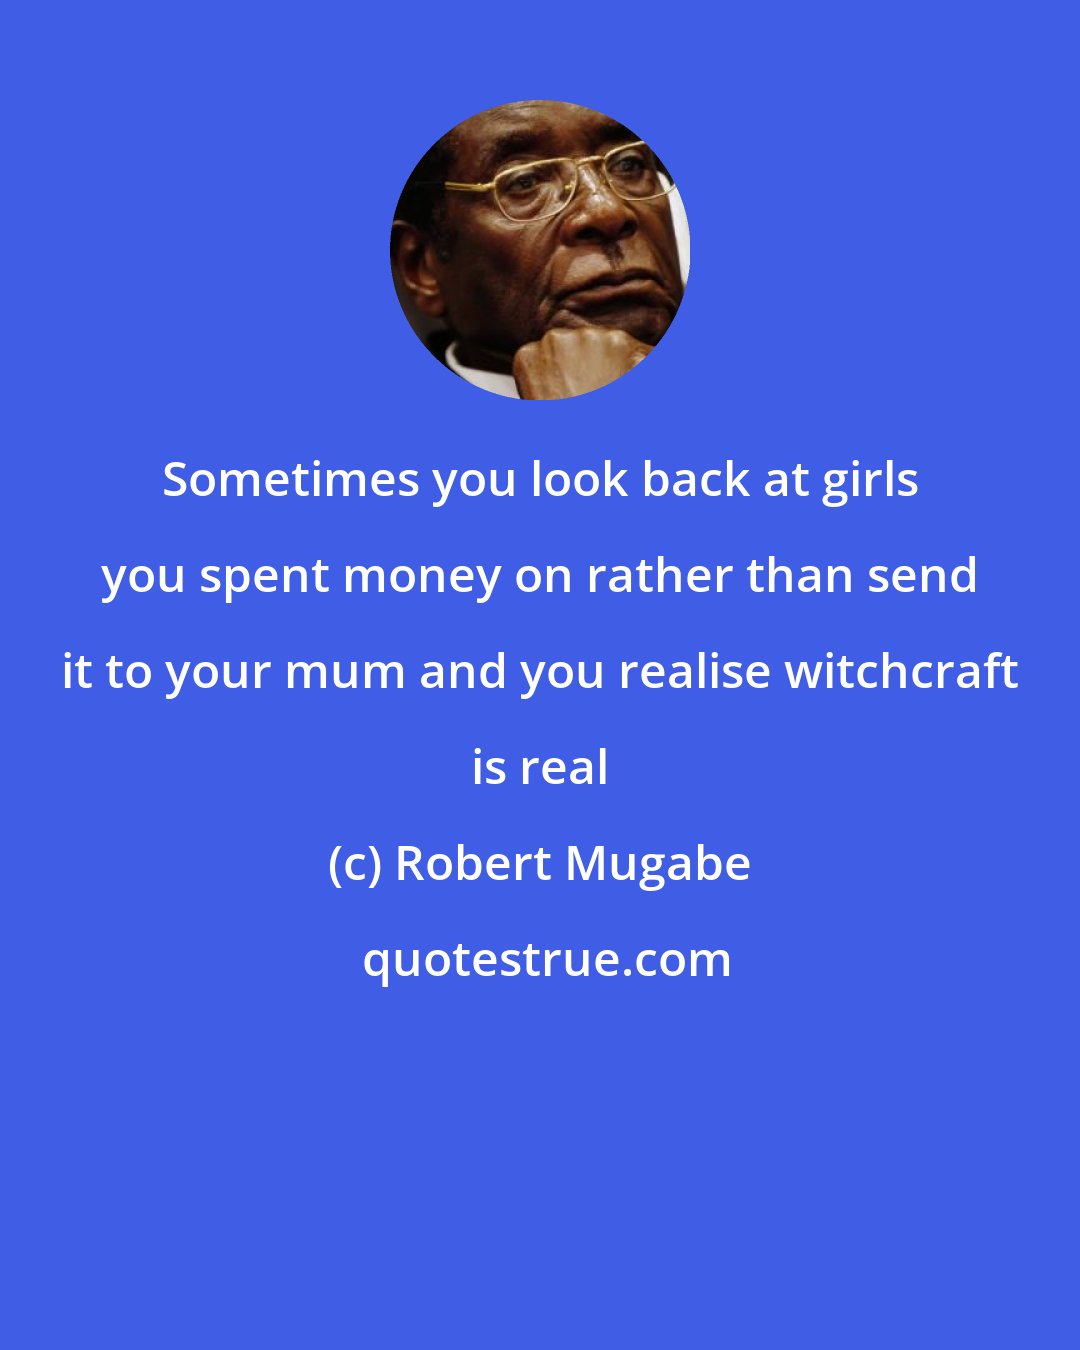 Robert Mugabe: Sometimes you look back at girls you spent money on rather than send it to your mum and you realise witchcraft is real